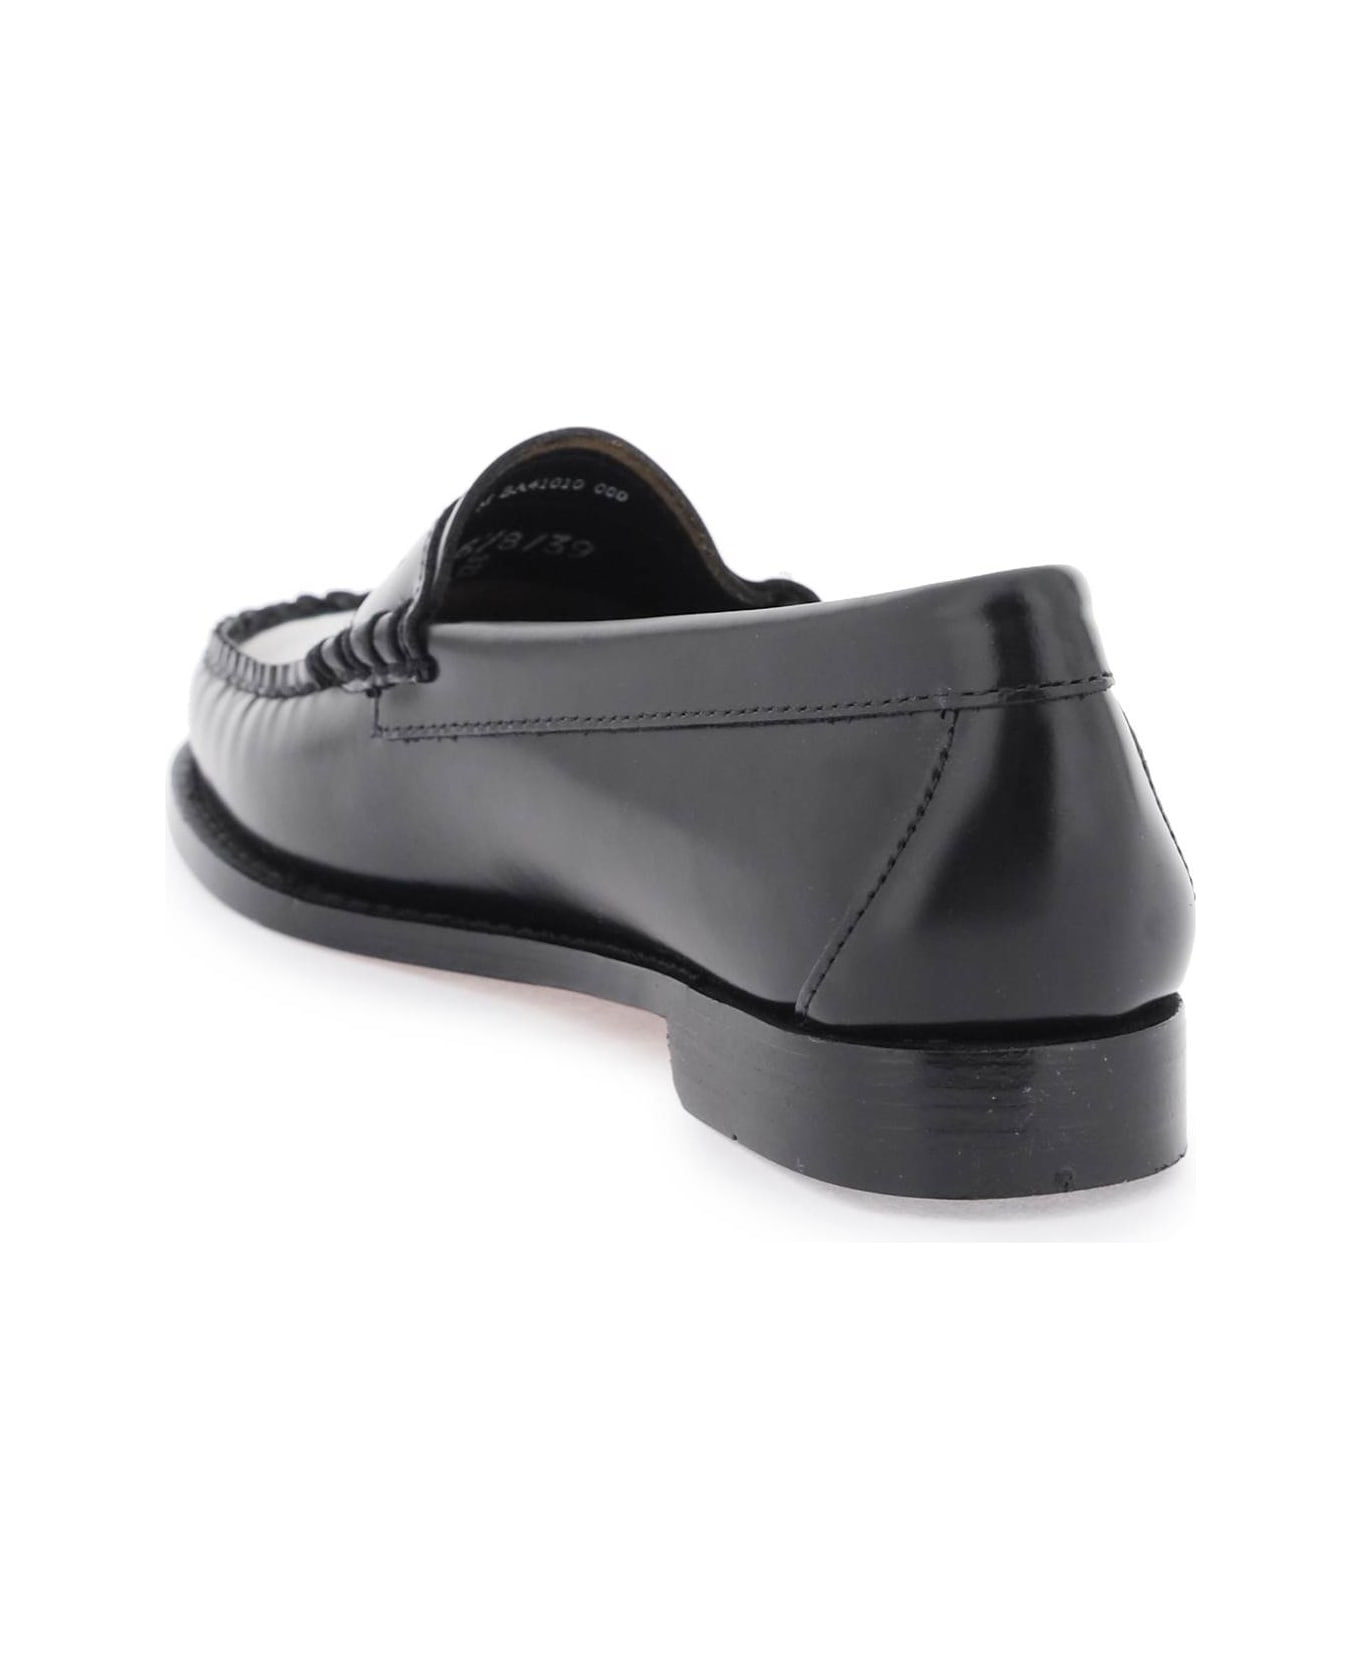 G.H.Bass & Co. Weejuns Penny Loafers - BLACK (Black)